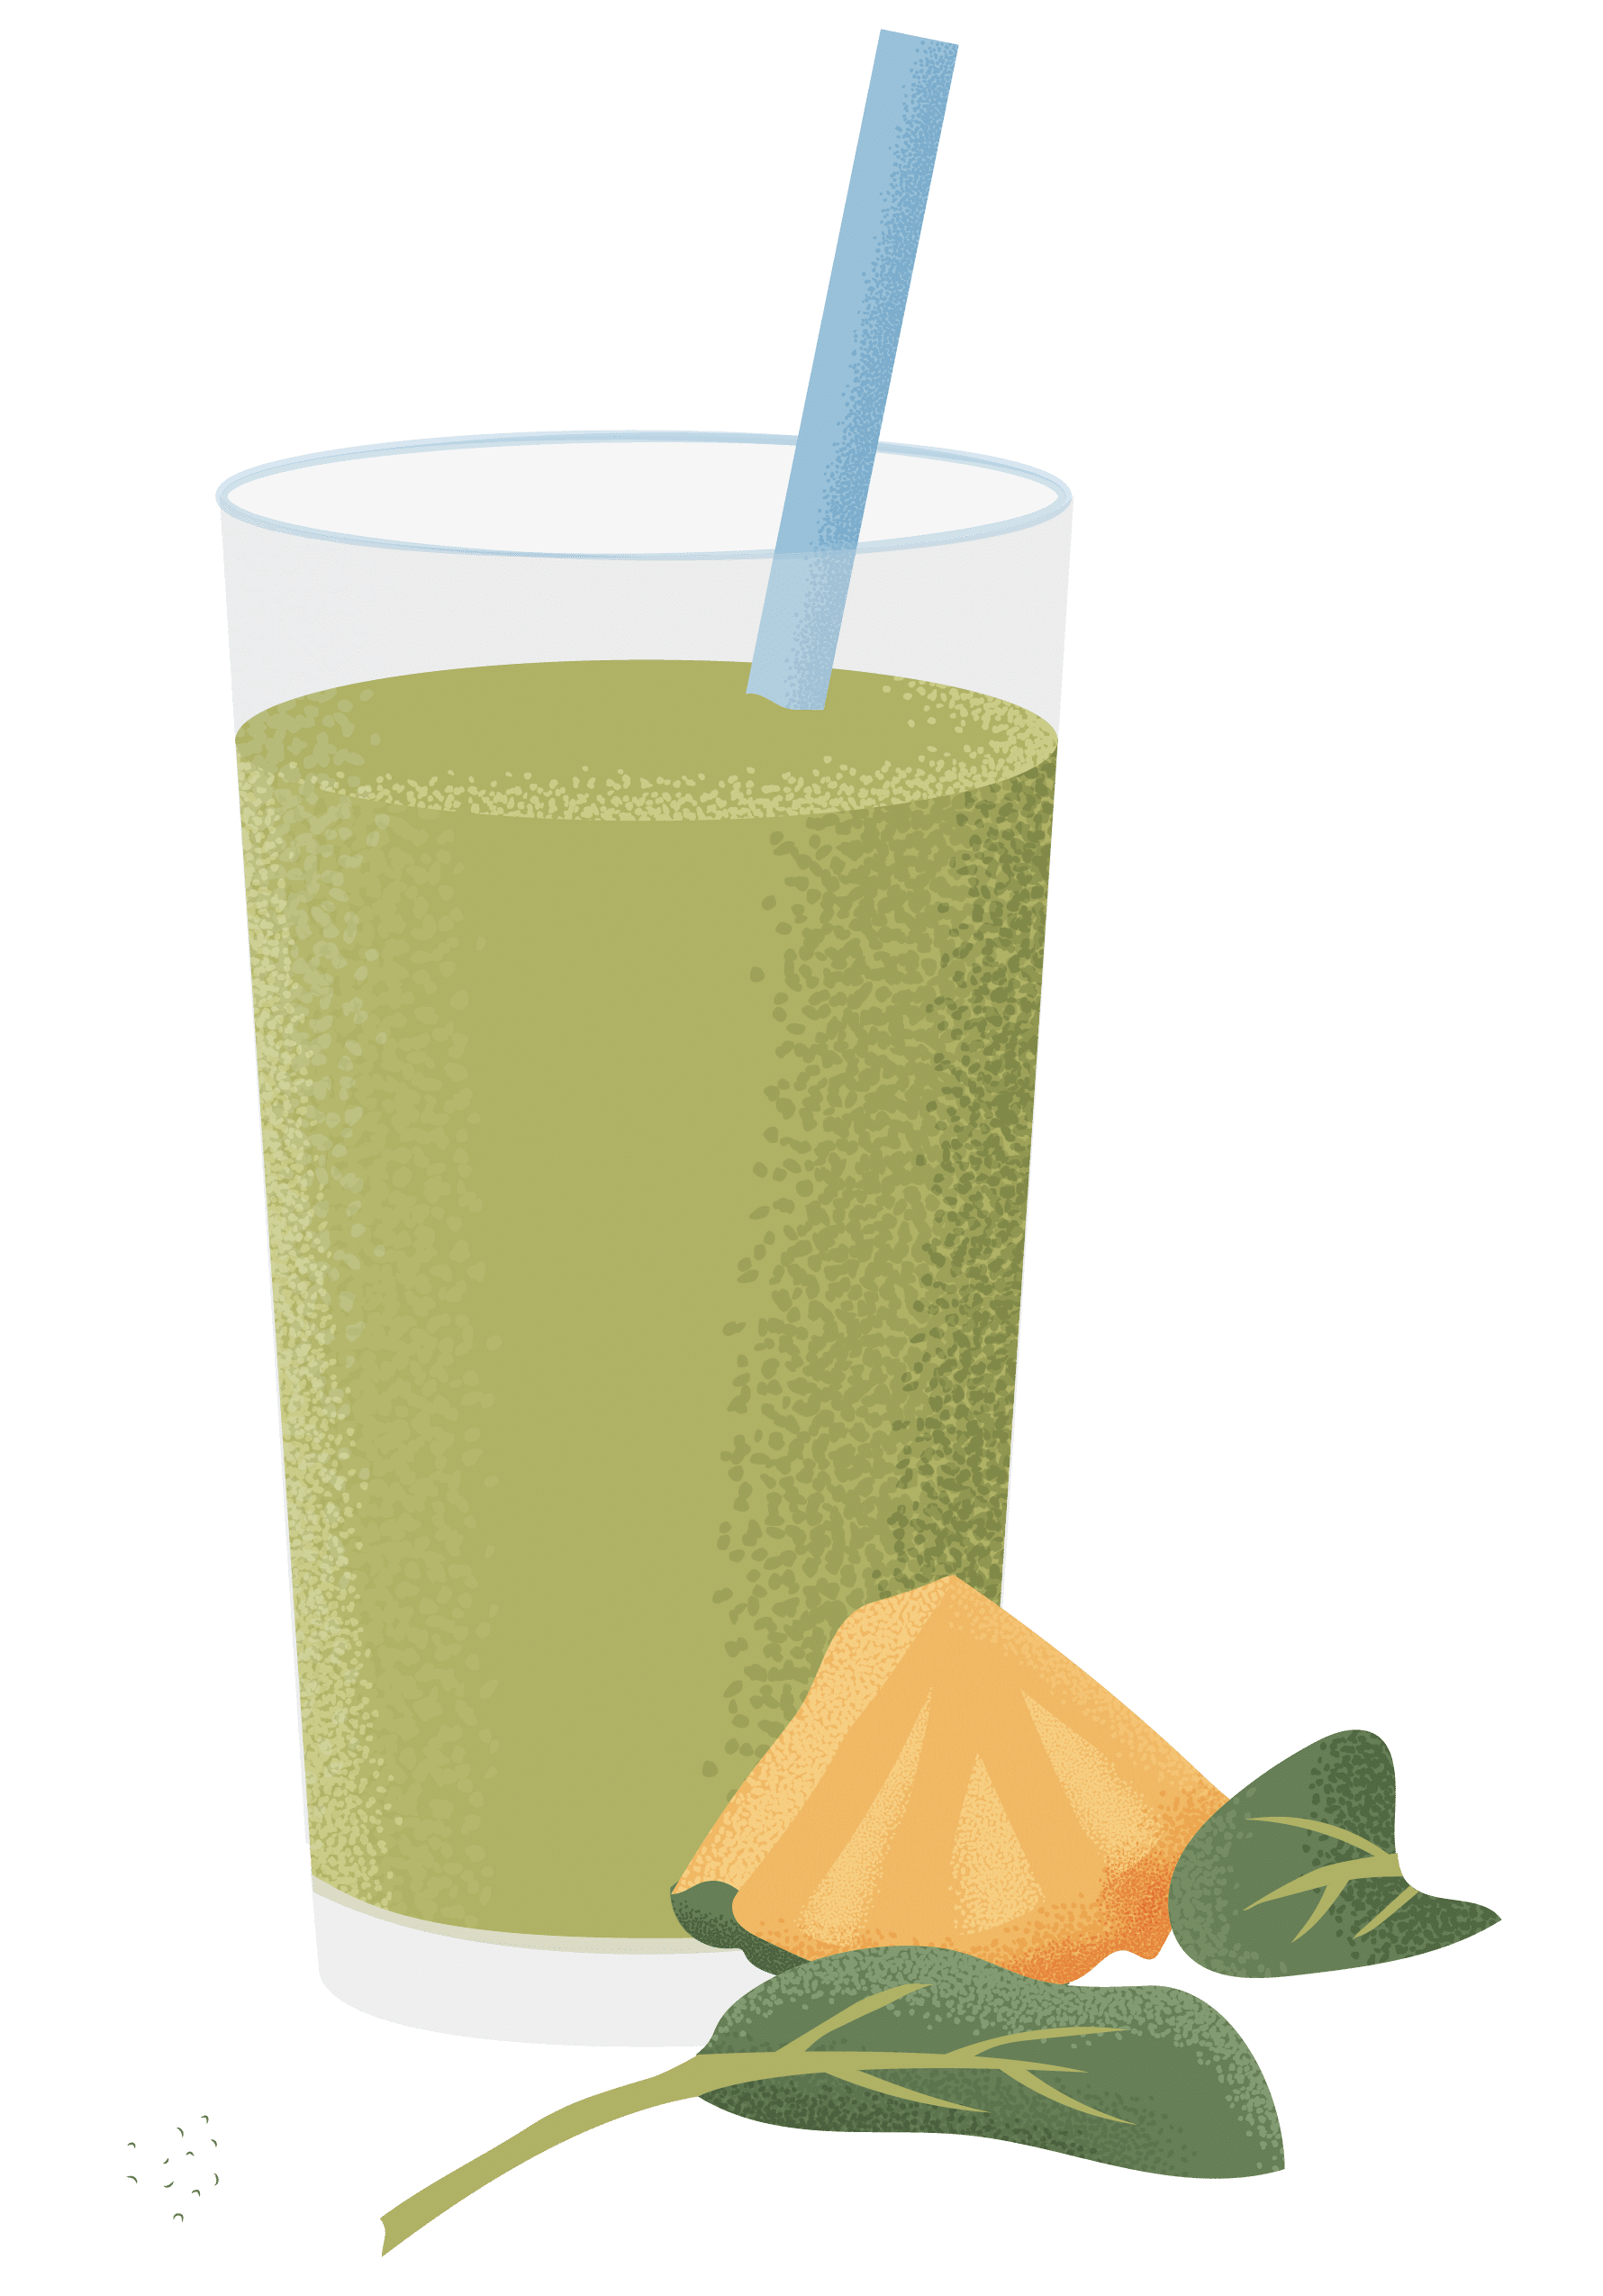 Healthy smoothie helps your child eat something besides junk food